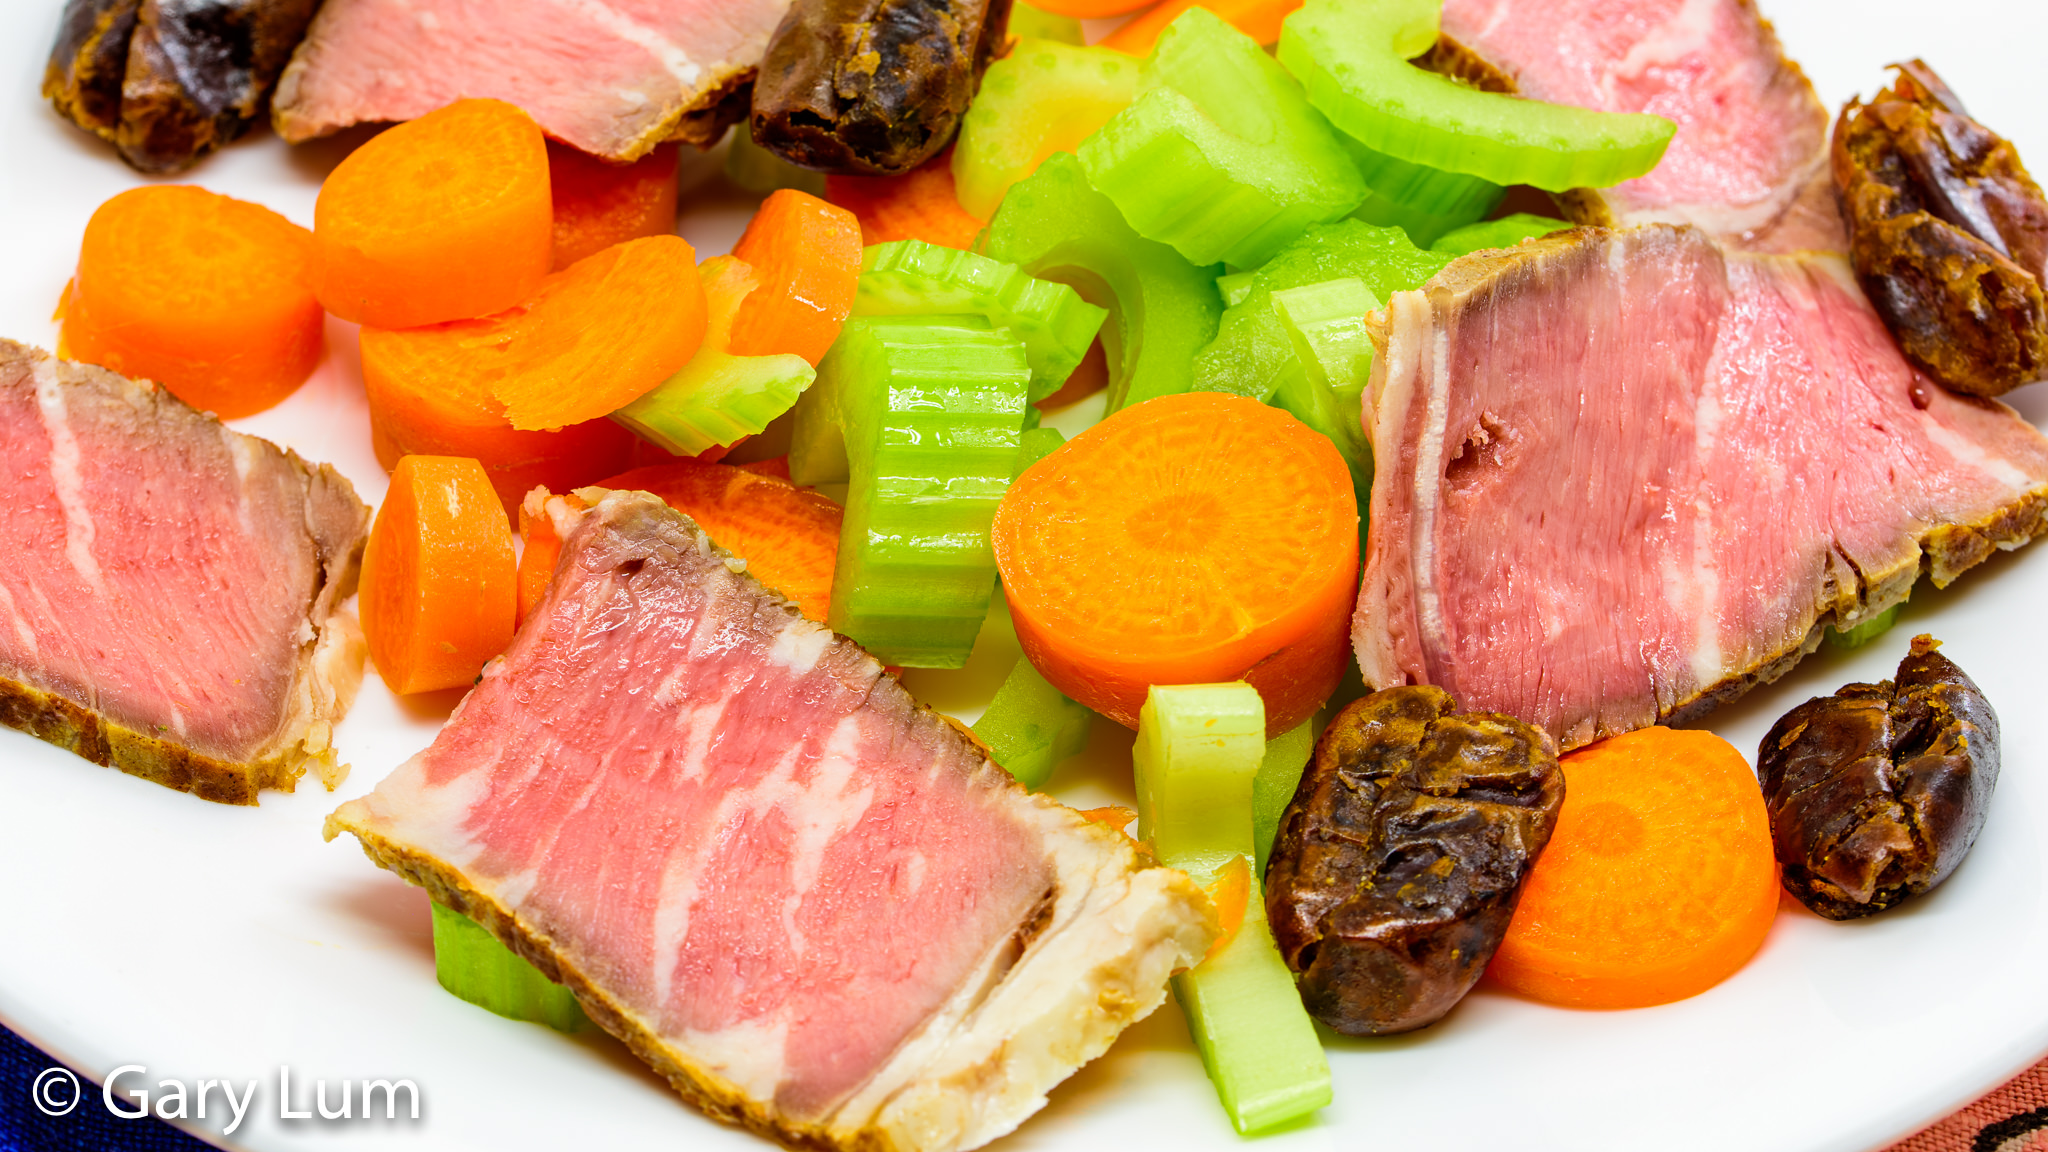 Leftover steak with carrot, celery, and dates. Gary Lum.